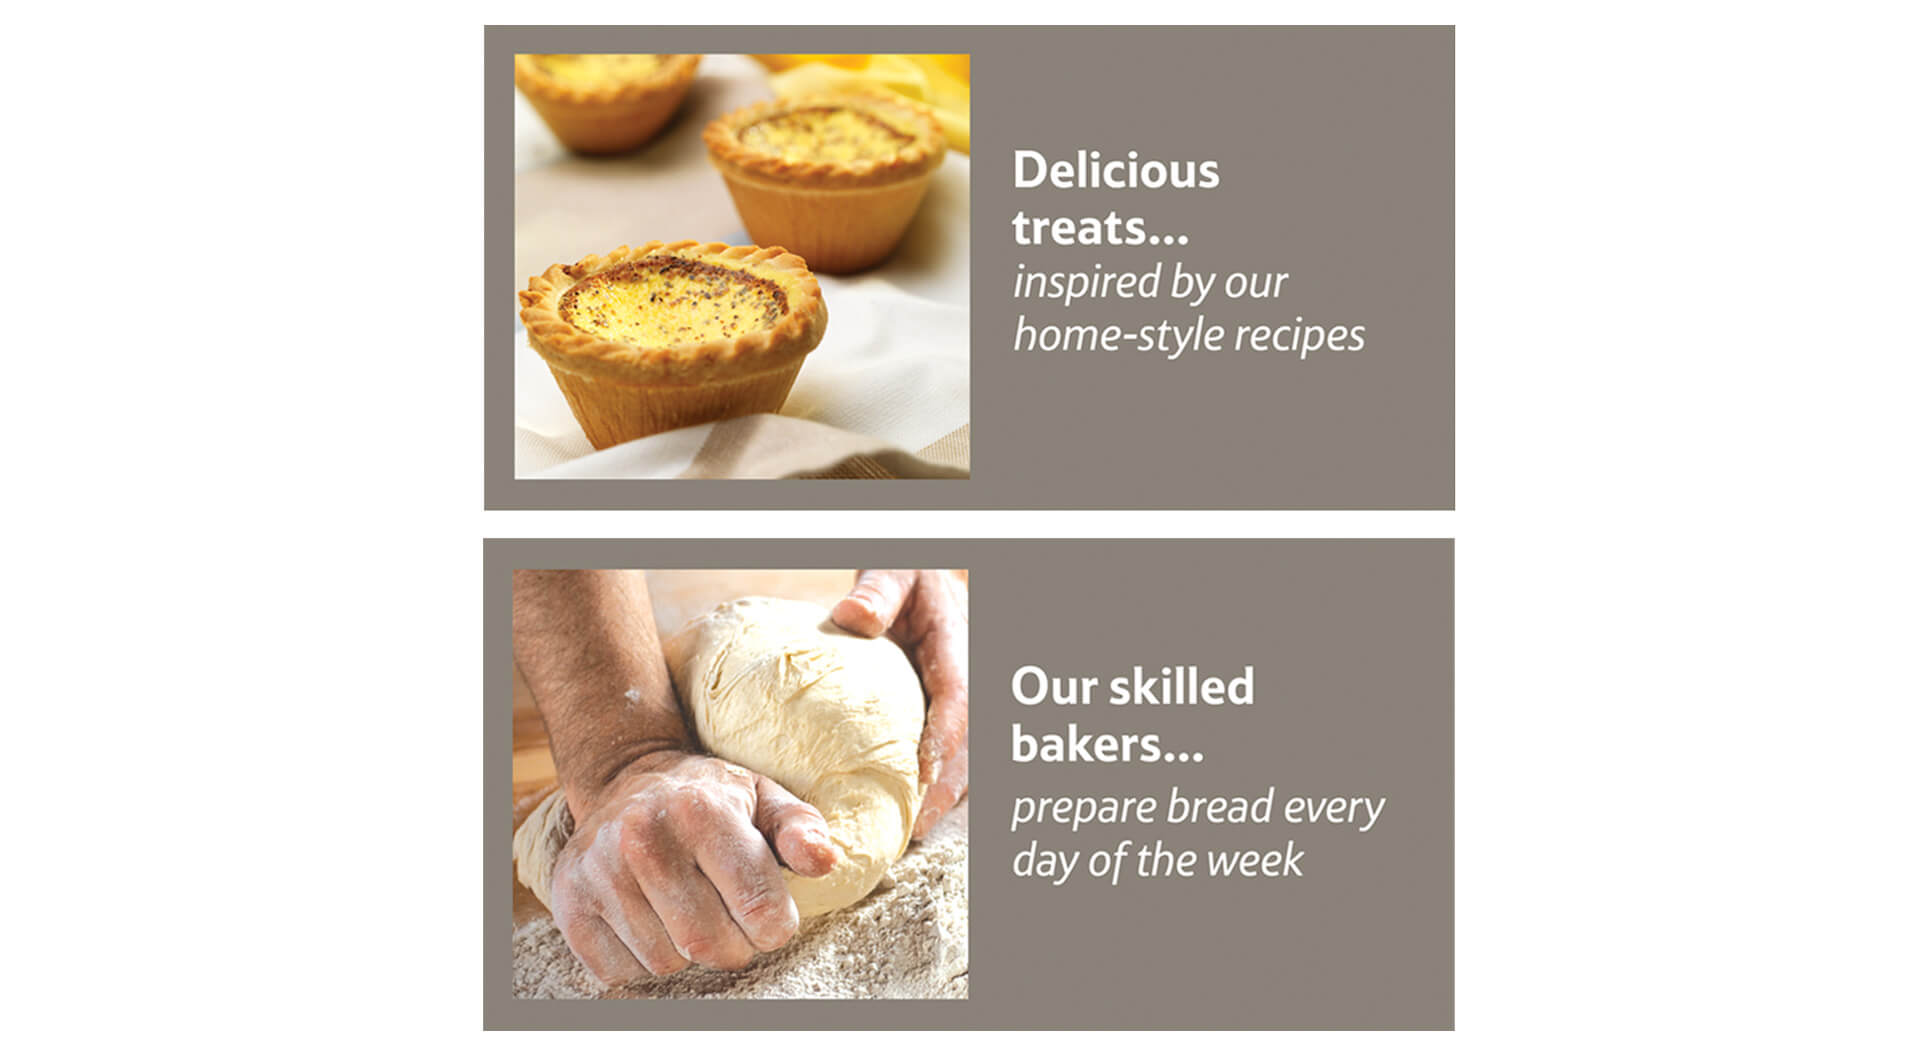 Tesco supermarket bakery graphic communications for our skilled bakers and delicious treats